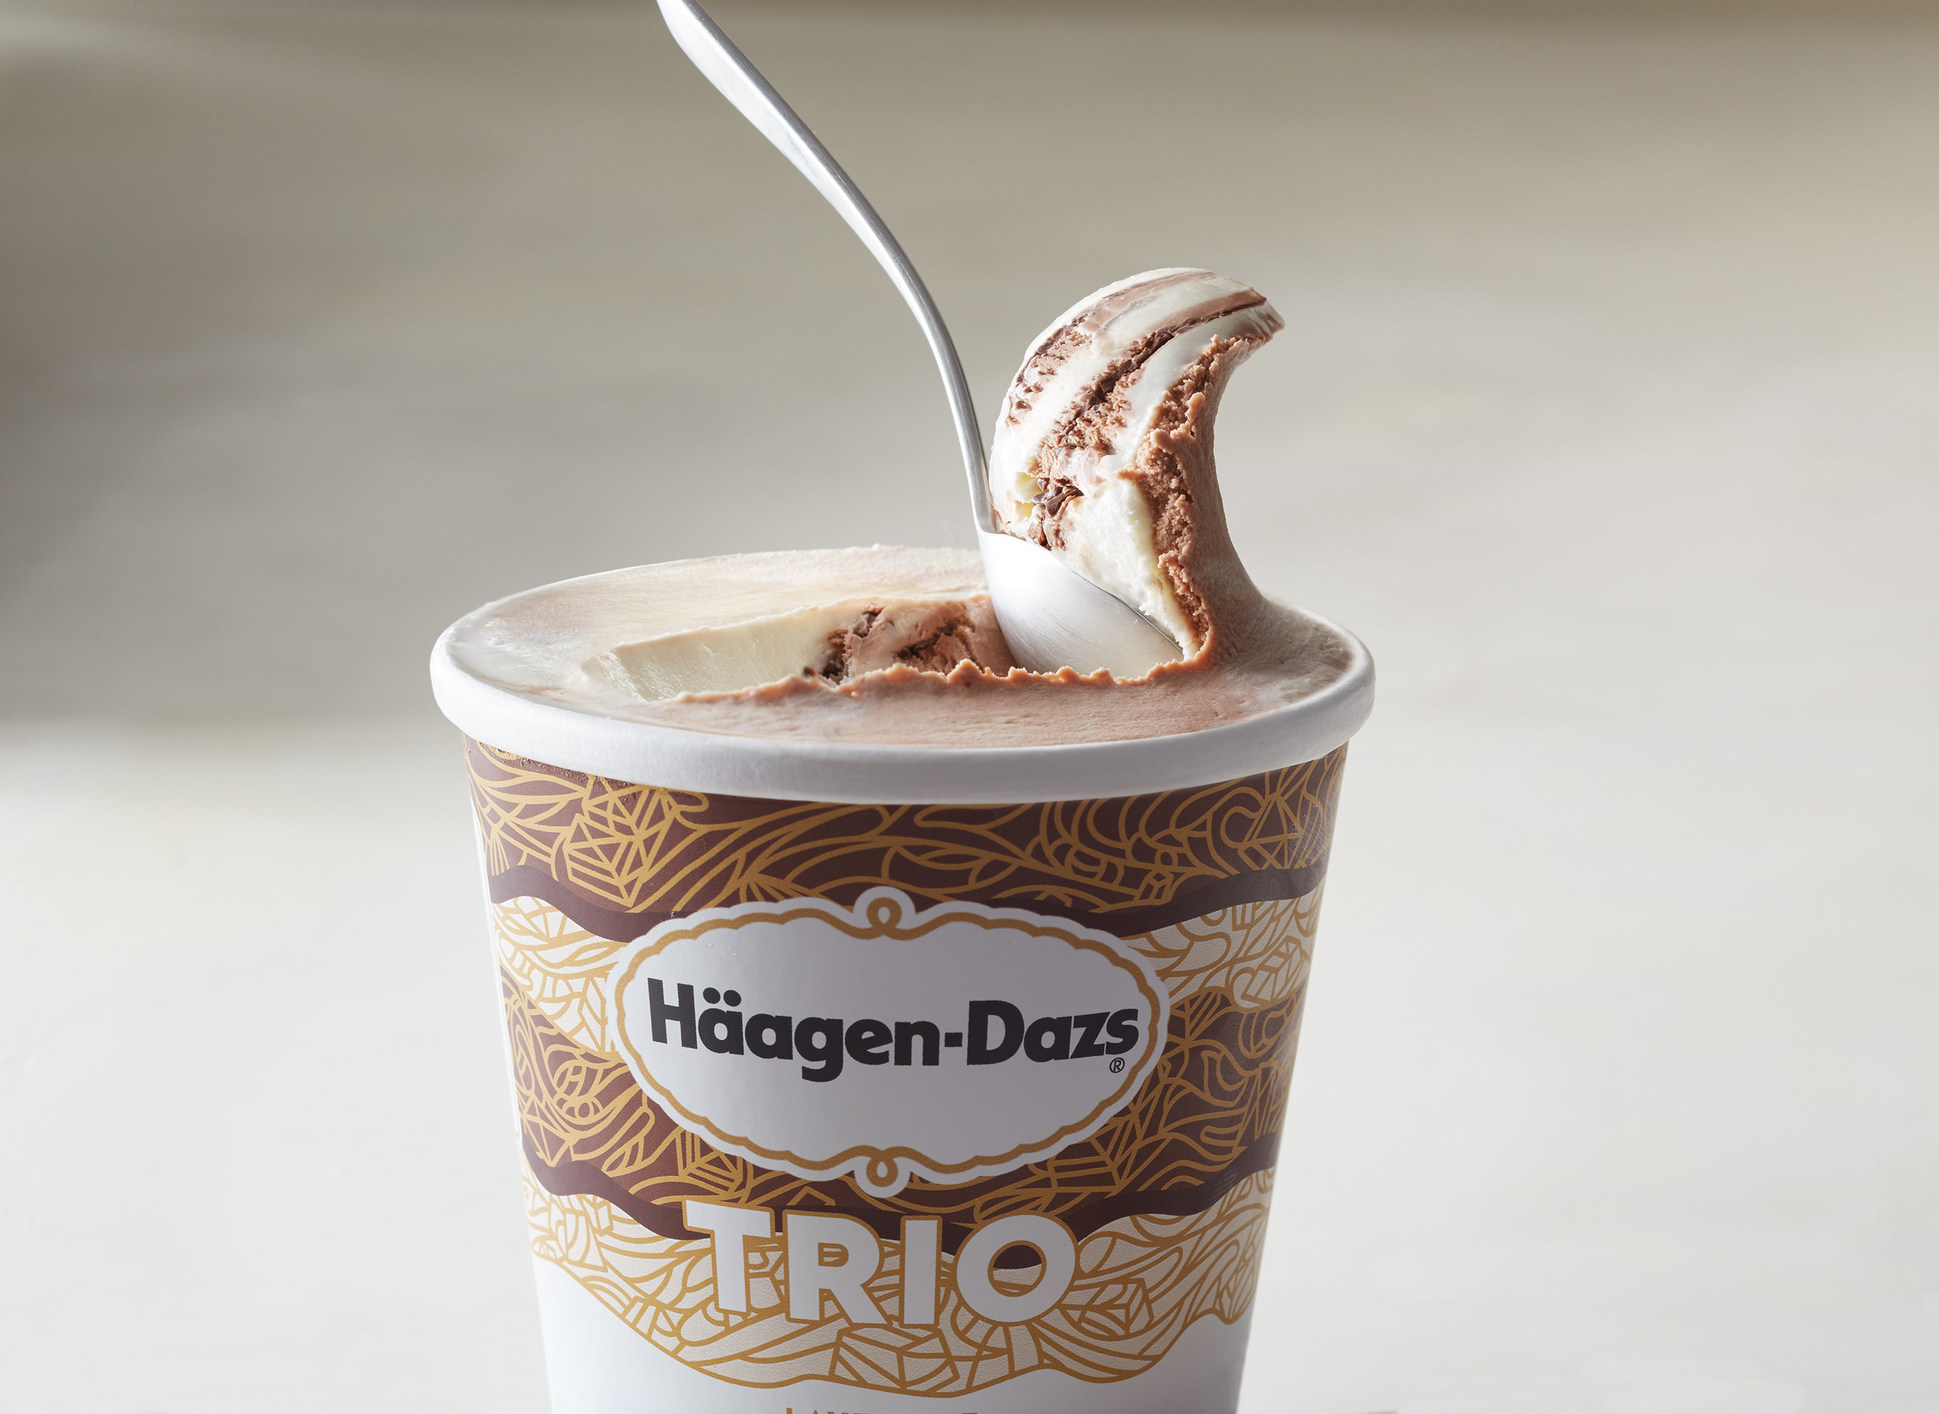 The Decadent Layers and New Brand Collection TRIO in Häagen-Dazs® Unveils Layers of Combinations